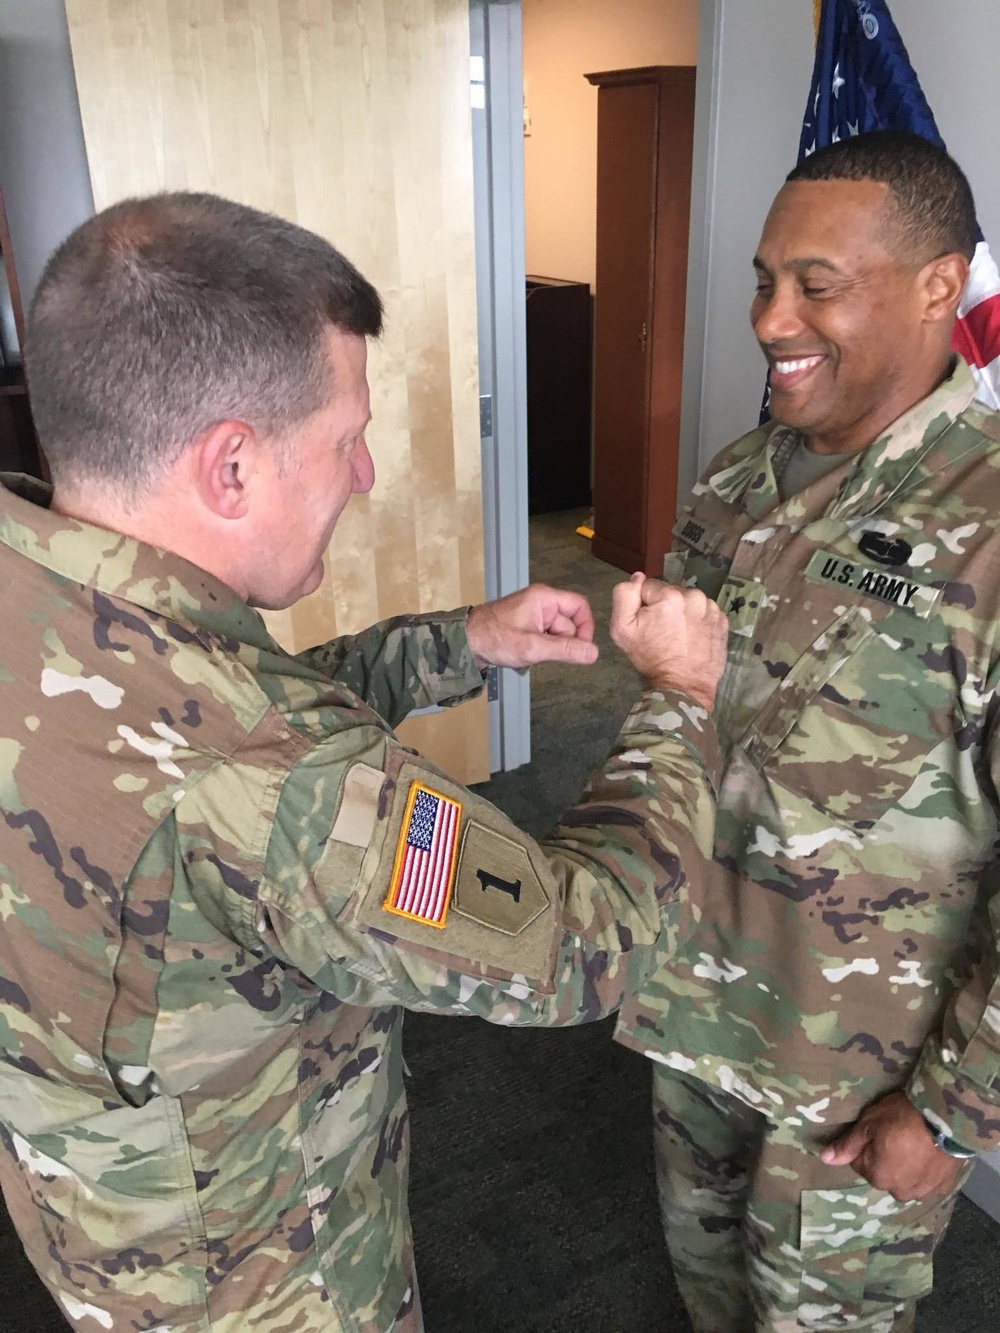 U.S. Army Reserve Col. Vincent E. Buggs promoted to brigadier general